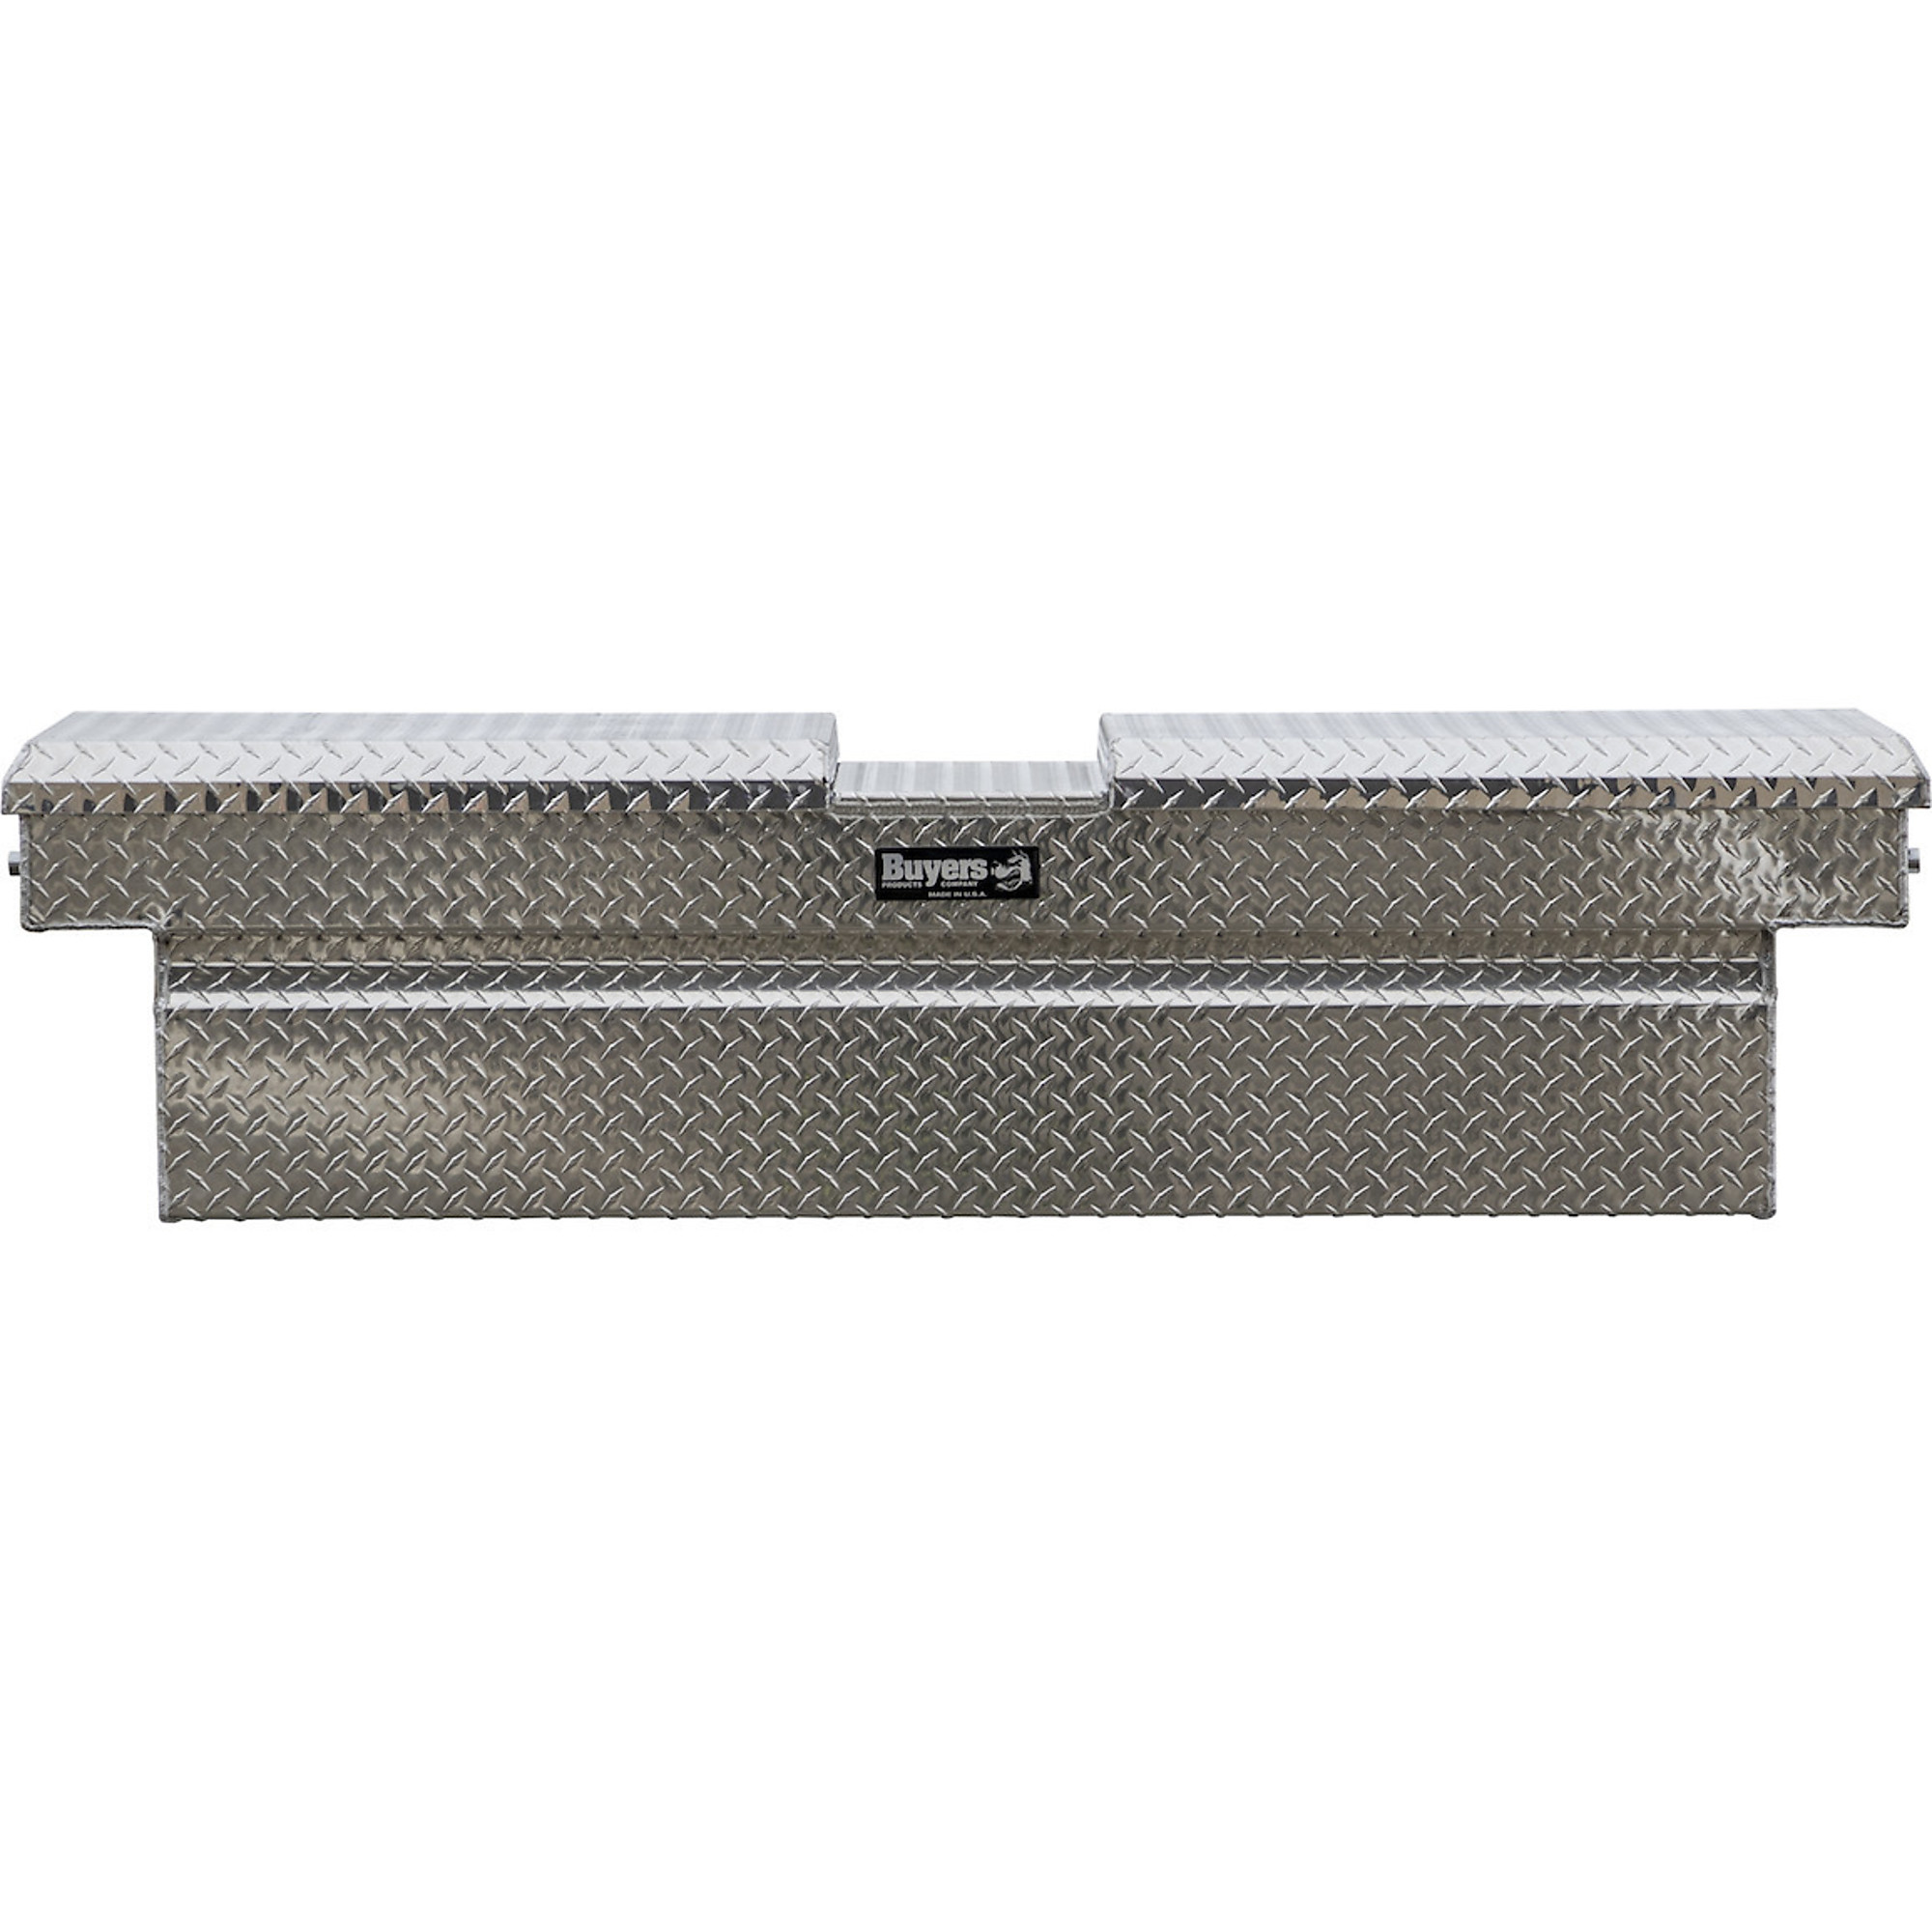 71Inch Diamond Tread Aluminum Gull Wing Truck Box, Width 71 in, Material Aluminum, Color Finish Diamond Plate Silver, Model - Buyers Products 1710413